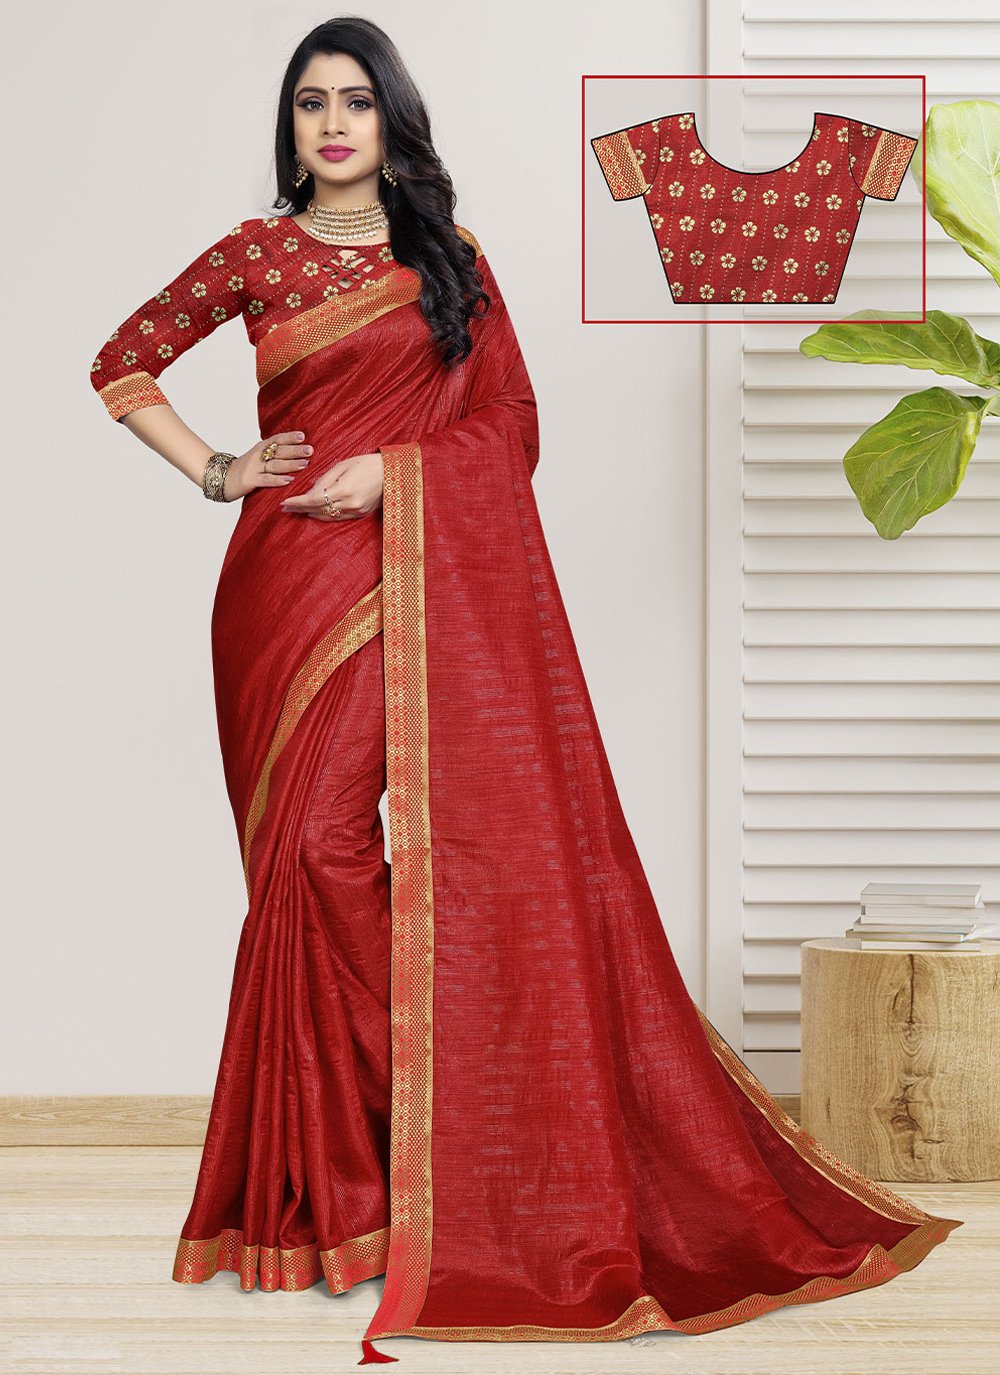 Red Trendy Saree in Vichitra Silk with Border